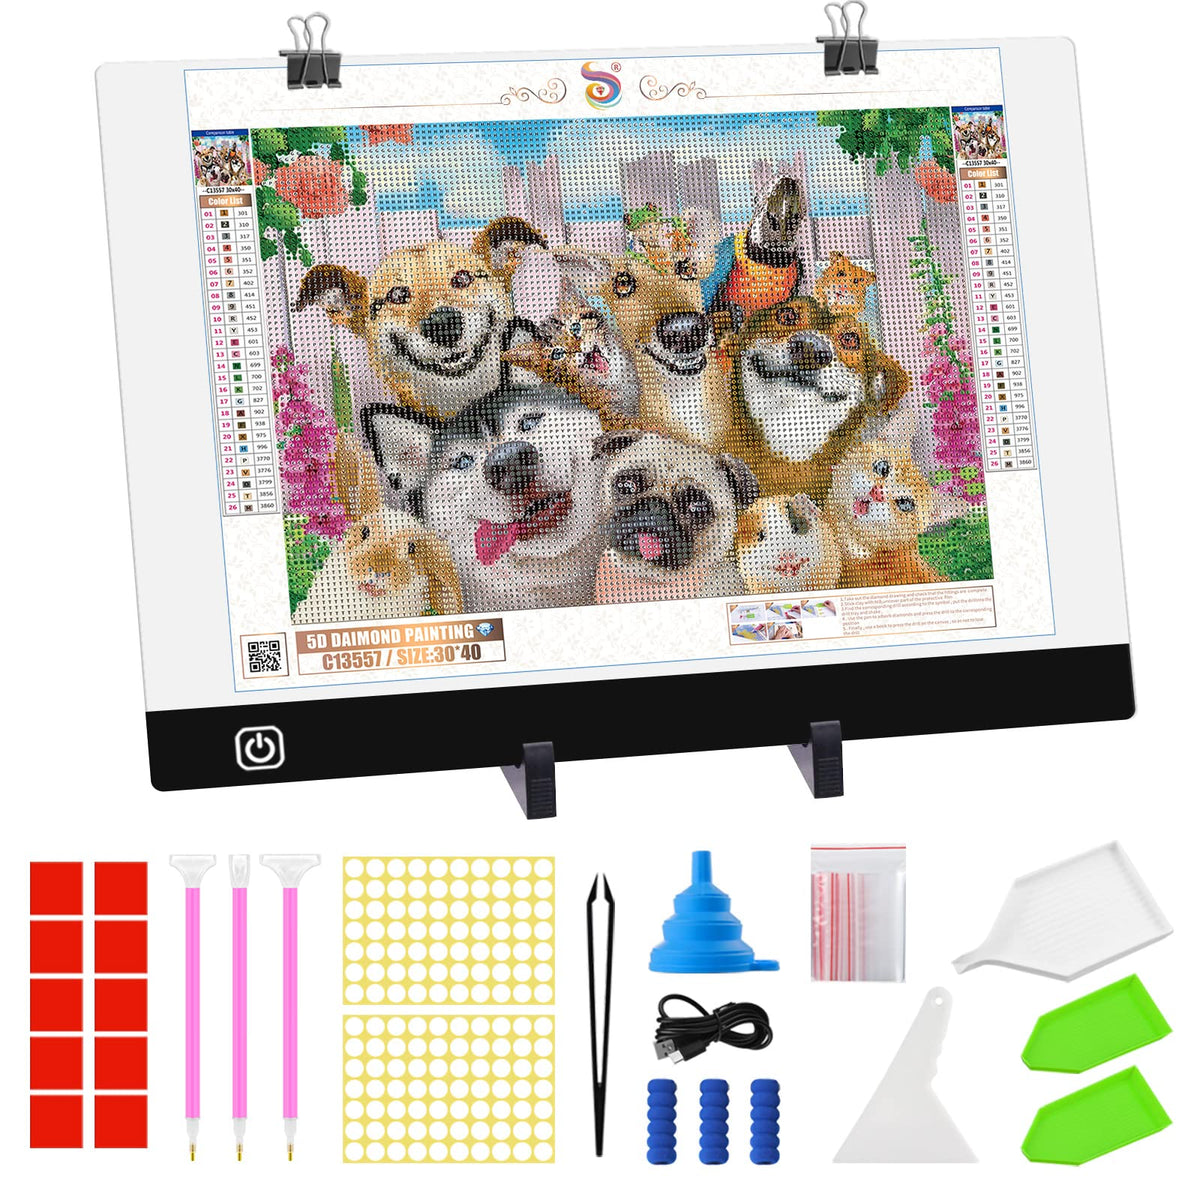  Ratukall A3 Light Pad for Diamond Painting, Diamond Art LED Light  Board Kit, Portable Light Box for Tracing with 5D Painting Tools Set for  Full Drill Diamond Painting Accessories